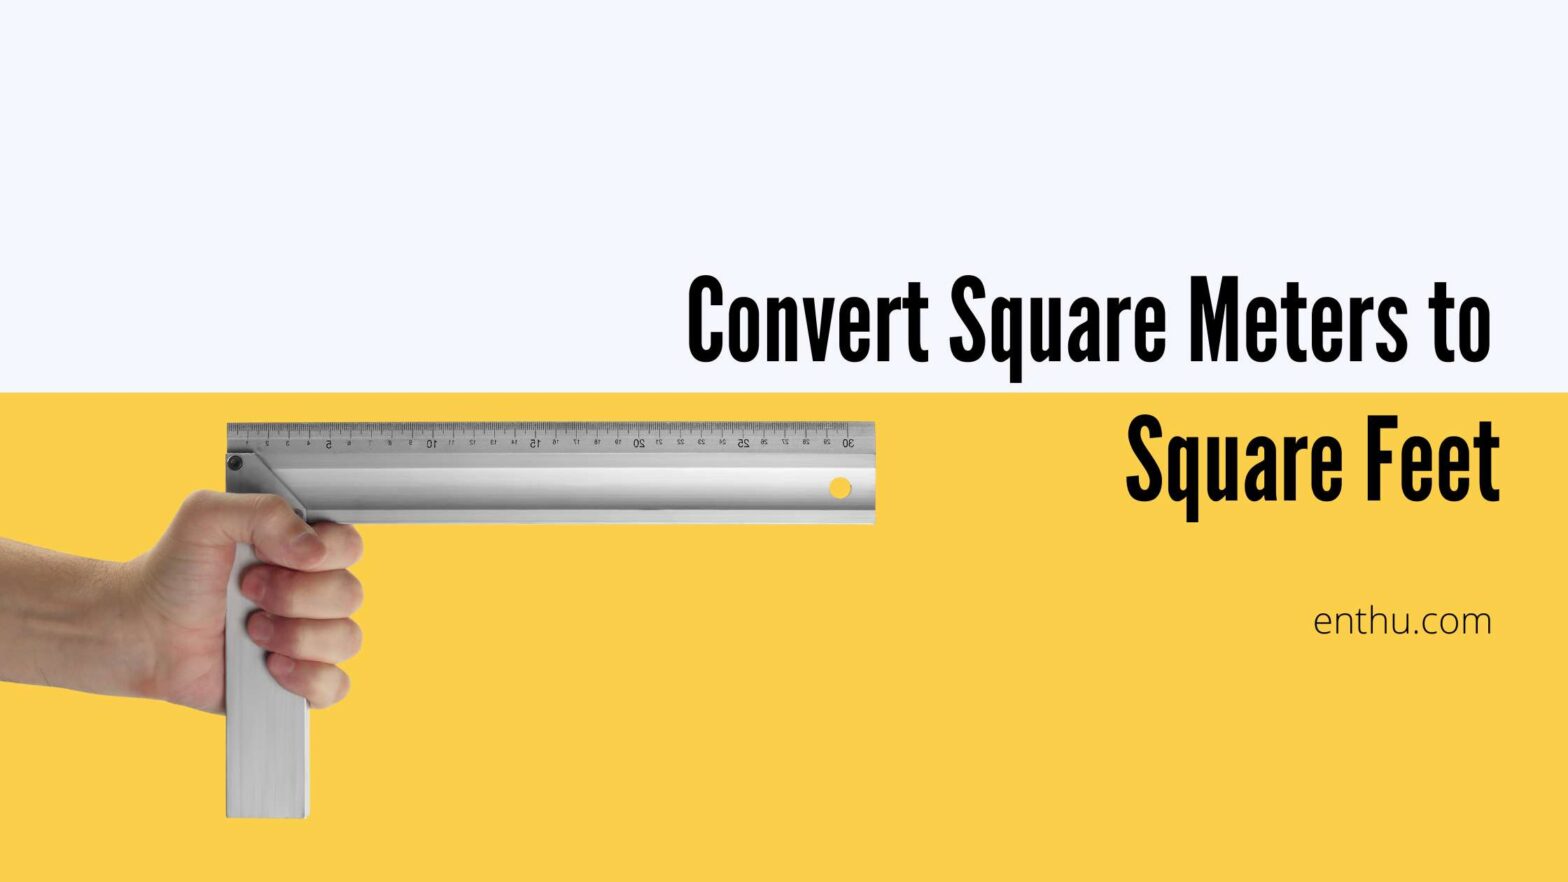 Convert Square Meters to Square Feet